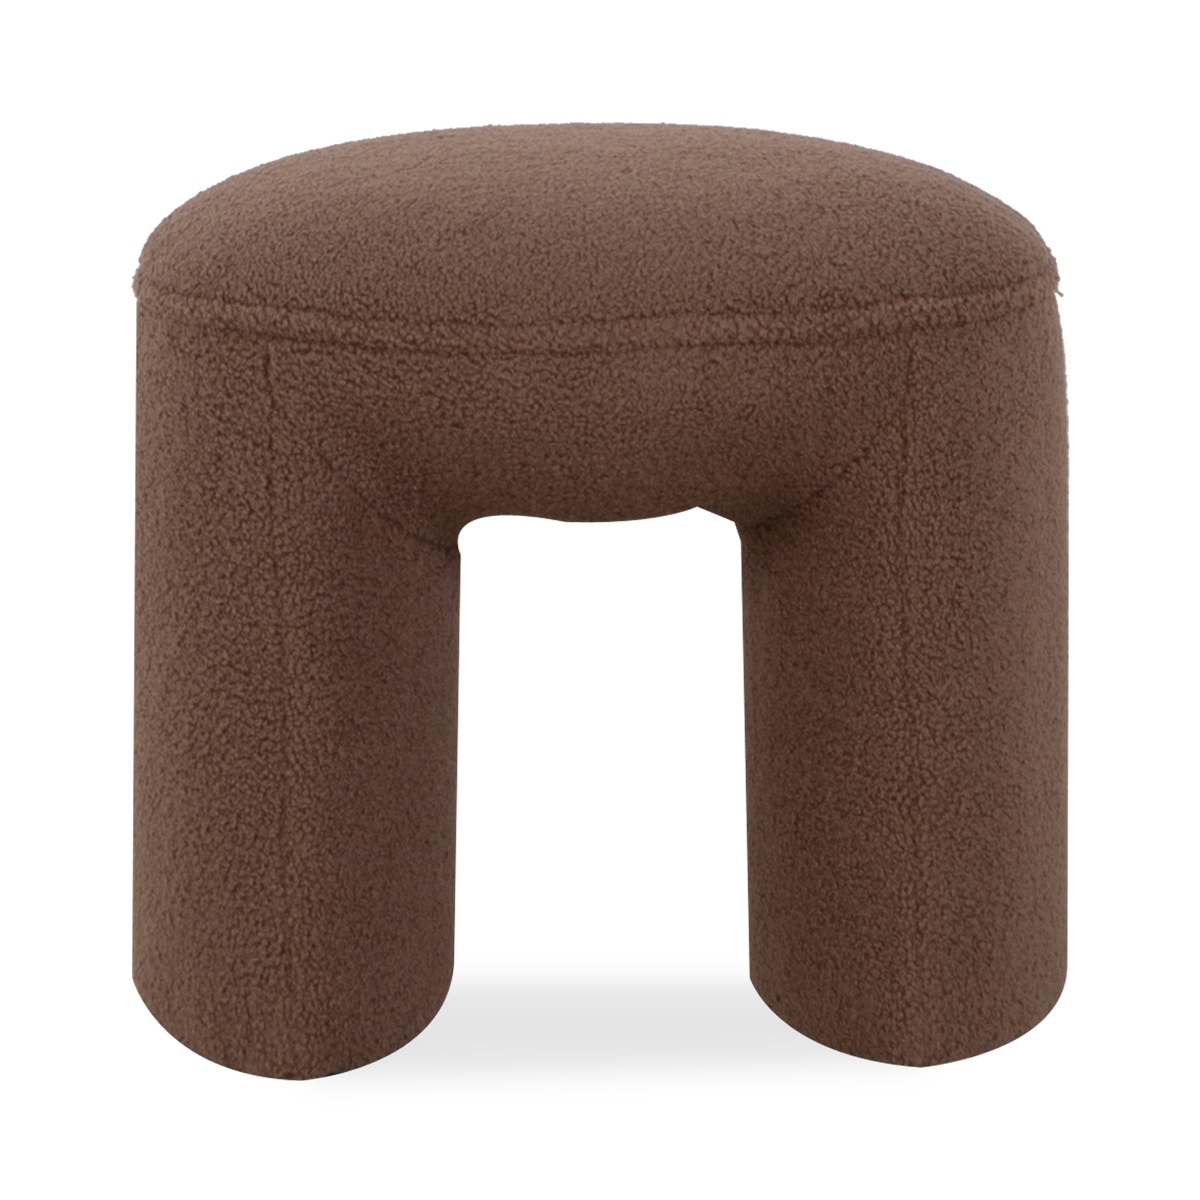 With its sculptural and organic shapes, the Tahoe Ottoman is a simple and contemporary piece suitable for a wide range of interiors schemes.